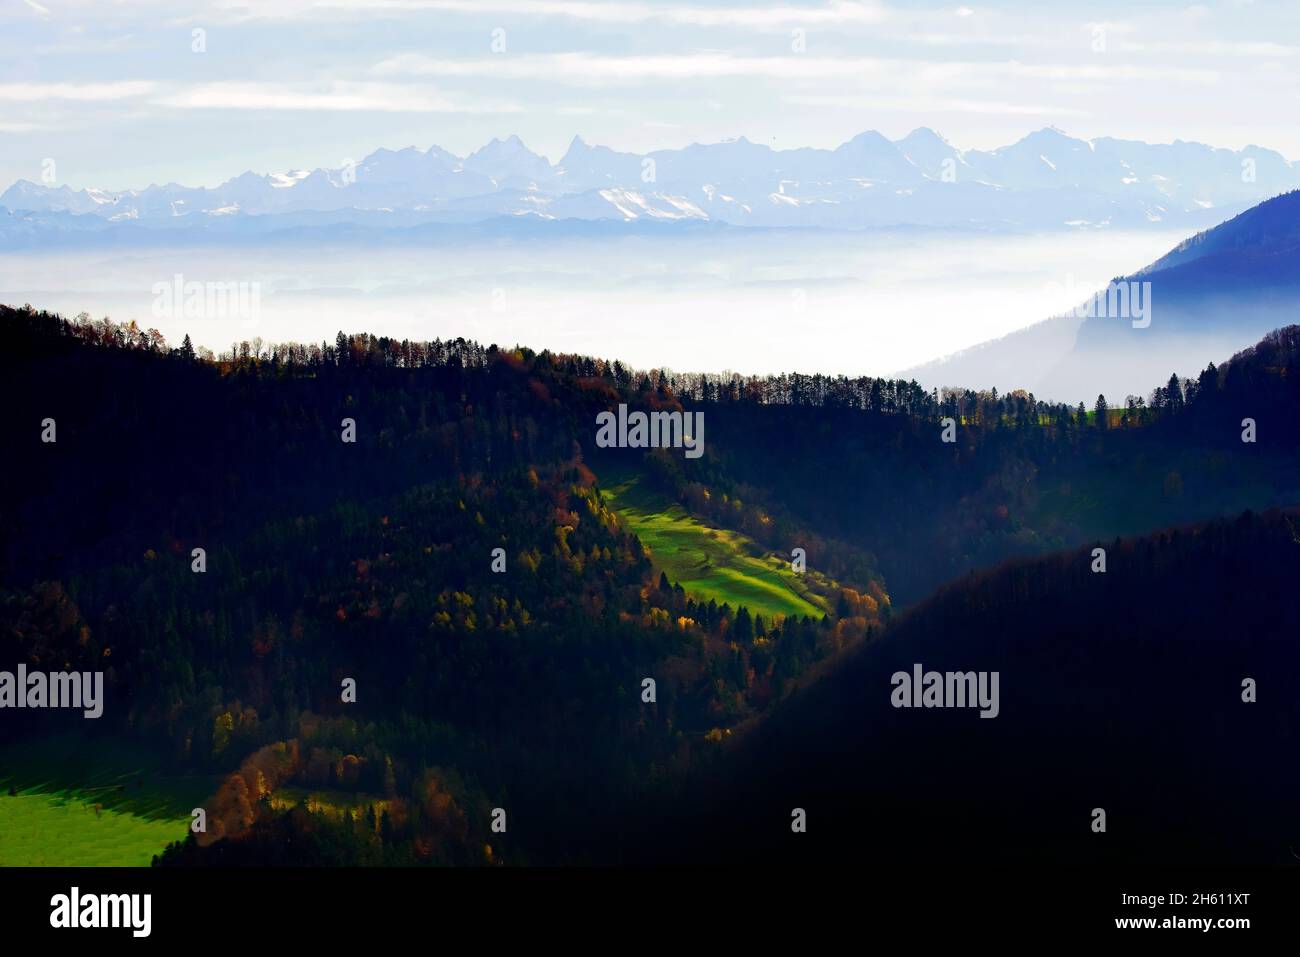 Panoramic view from the mountains above the Regional Nature Park Thal Balsthal, Switzerland. The Jura Mountains in the canton of Solothurn in Switzerl Stock Photo